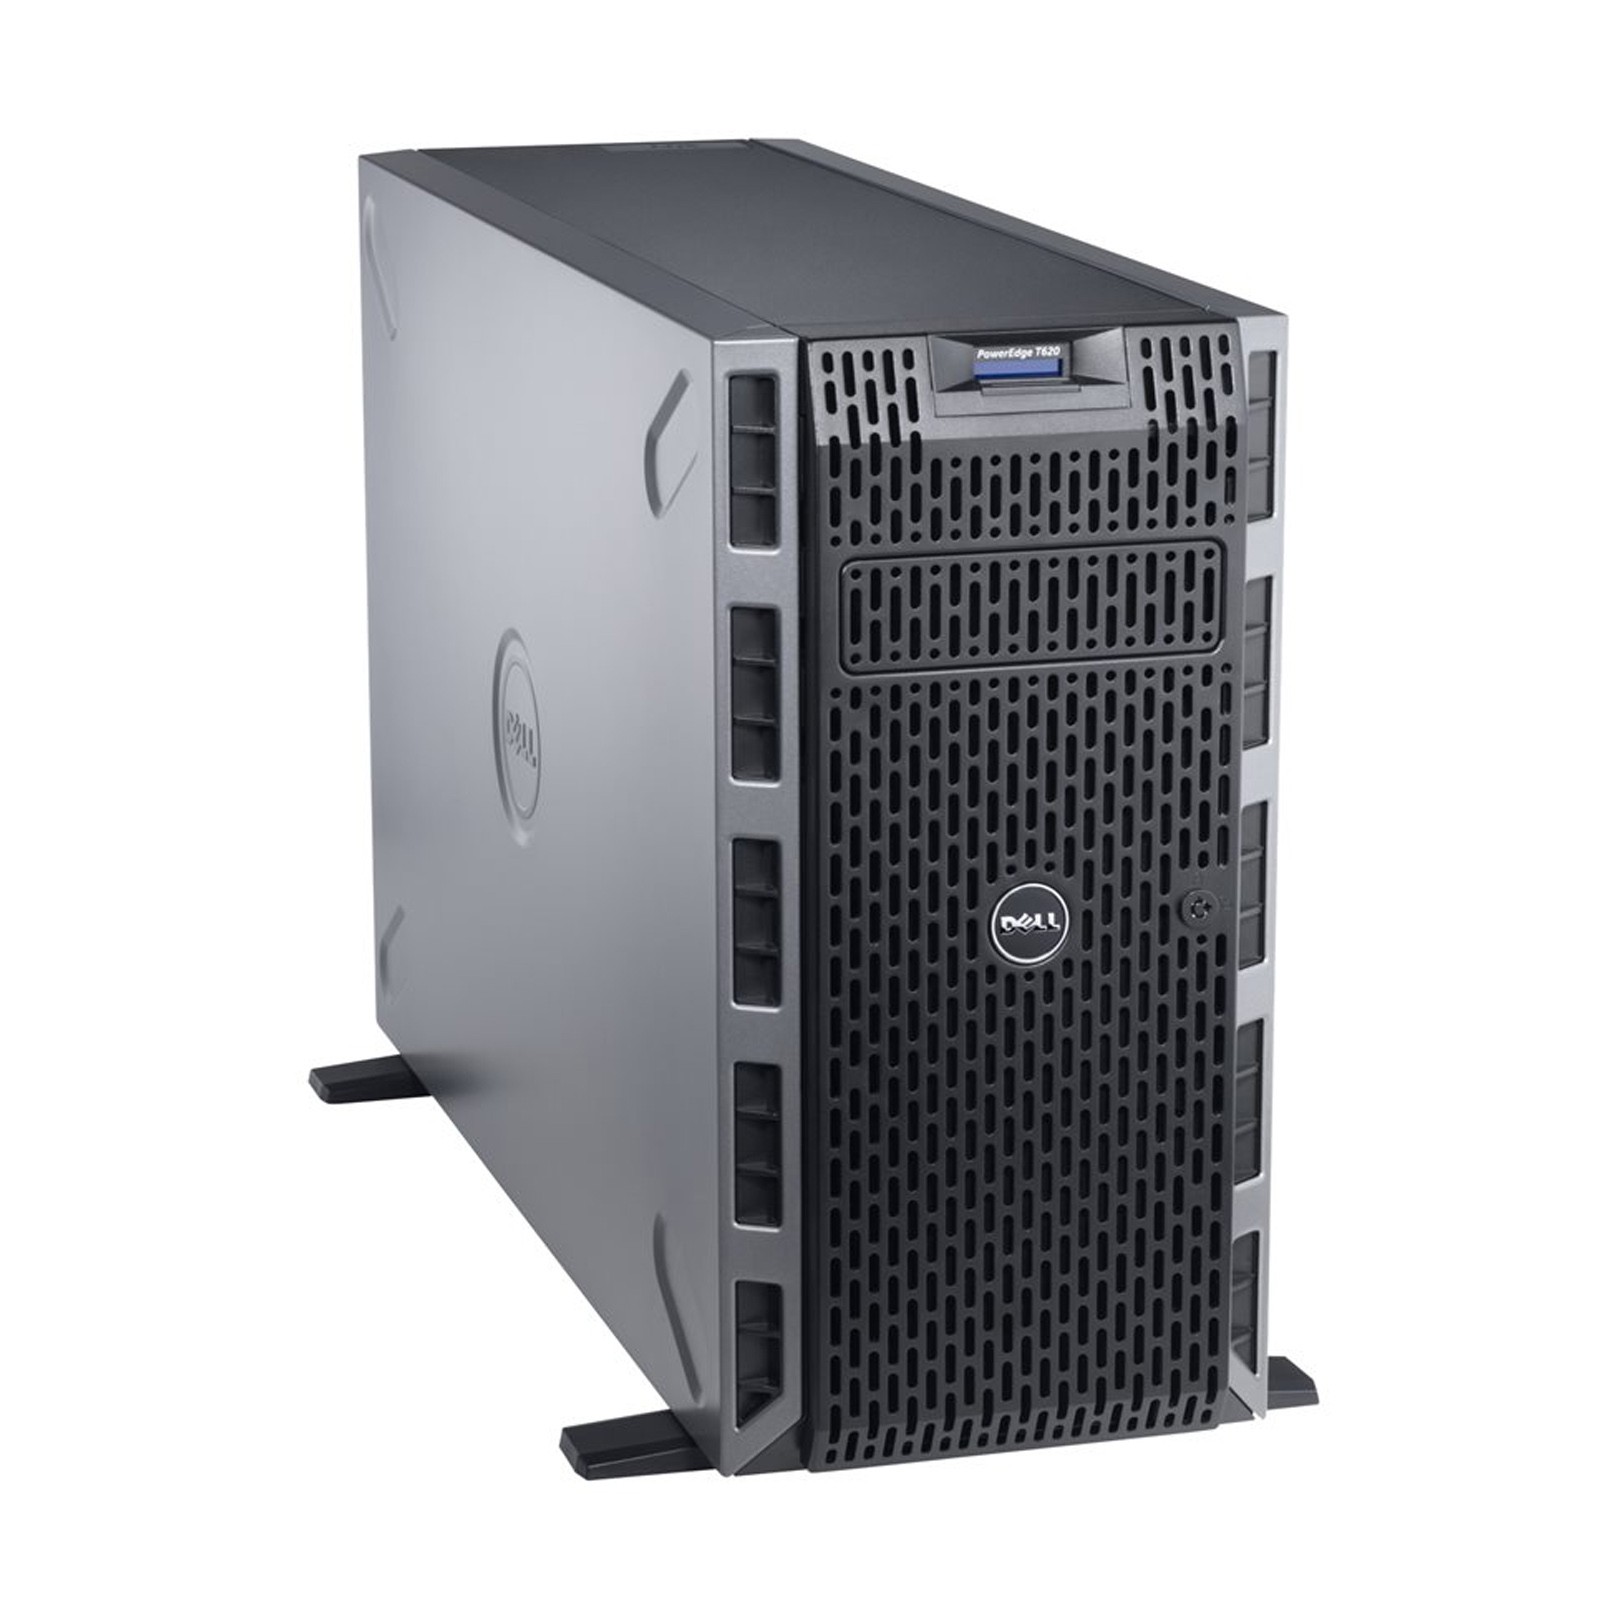 Dell PowerEdge T620 16x 2.5" (SFF) Tower Server - Front